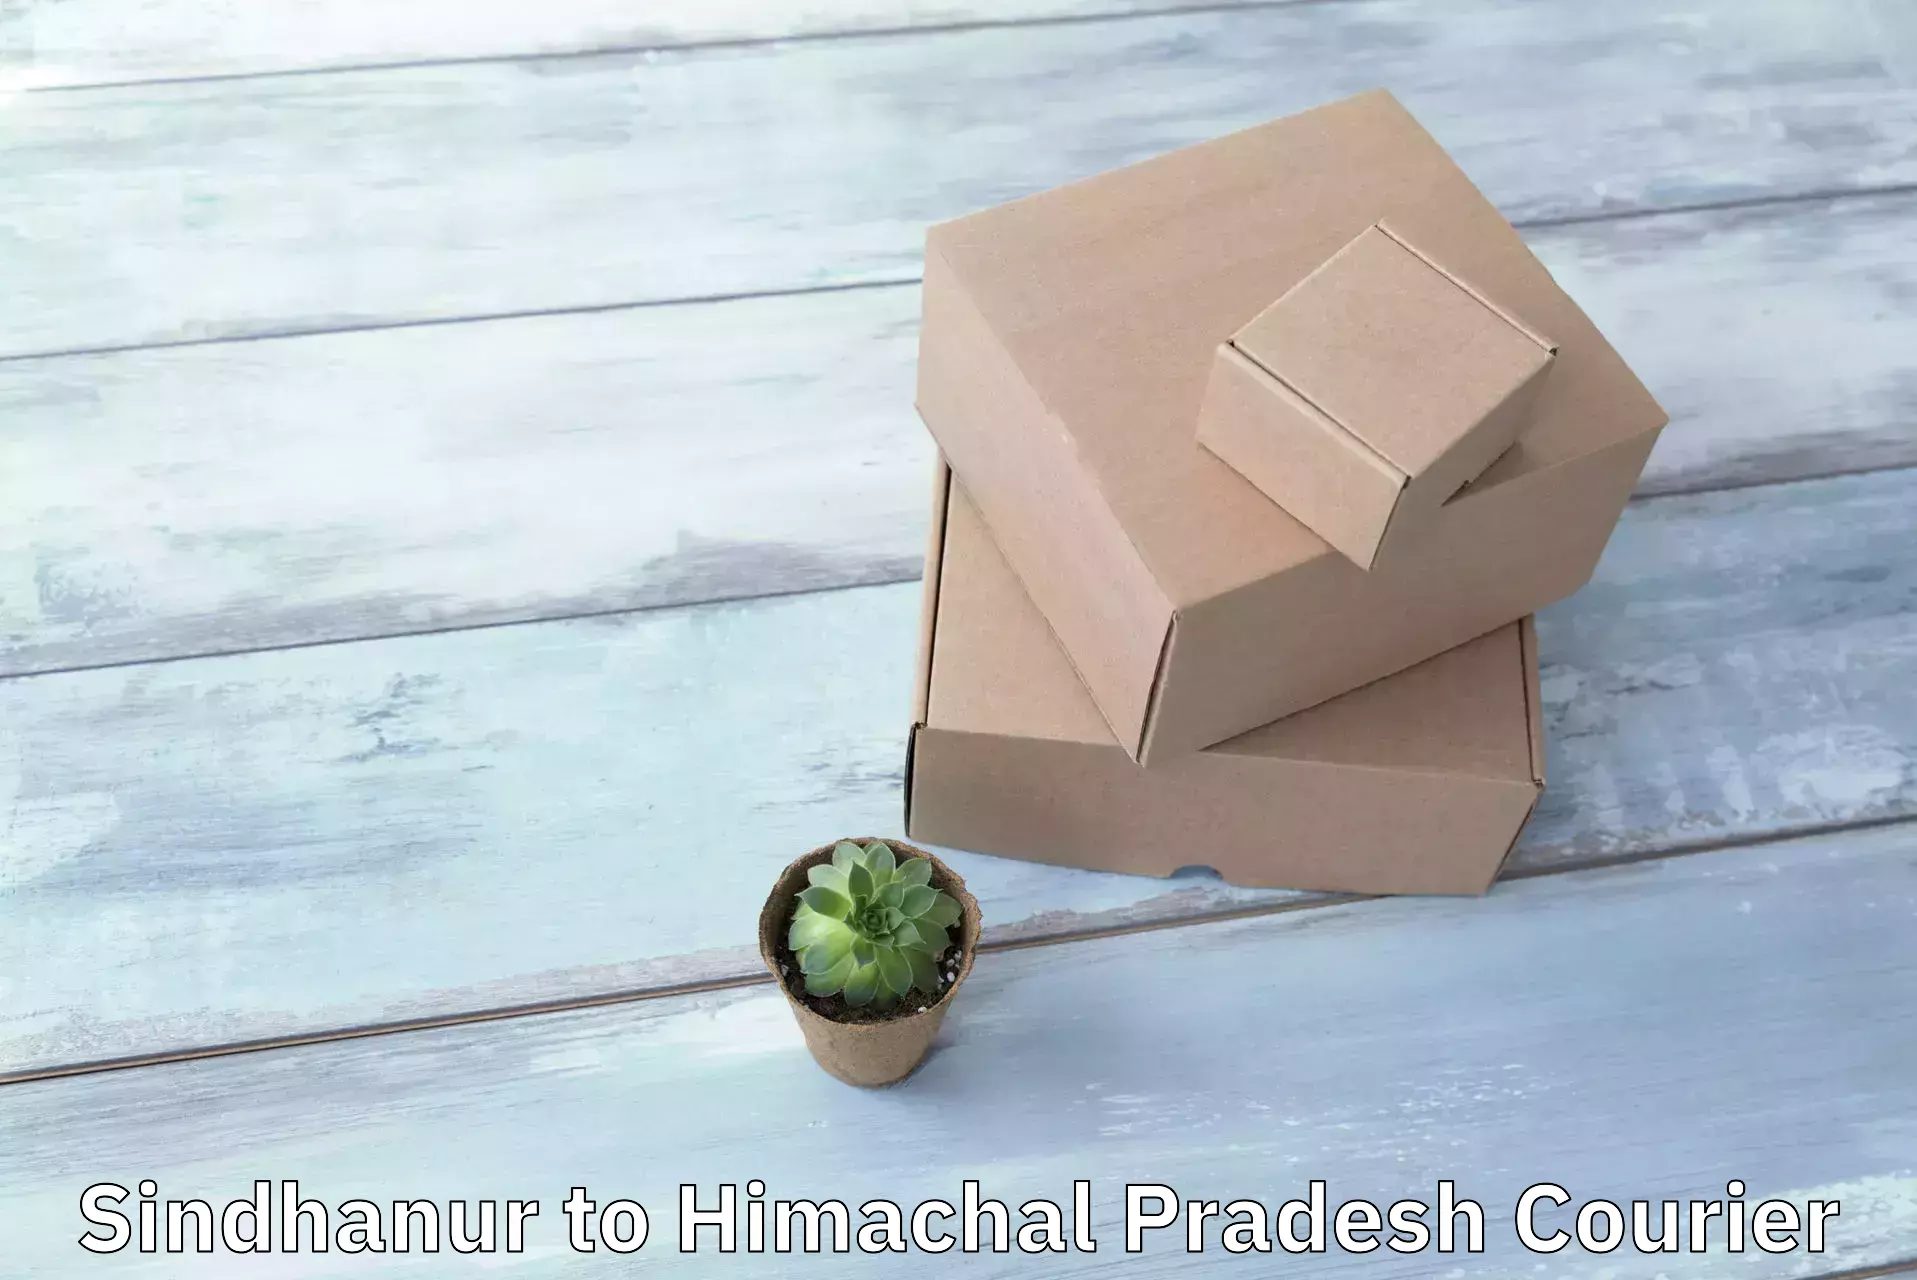 Special handling courier Sindhanur to YS Parmar University of Horticulture and Forestry Solan